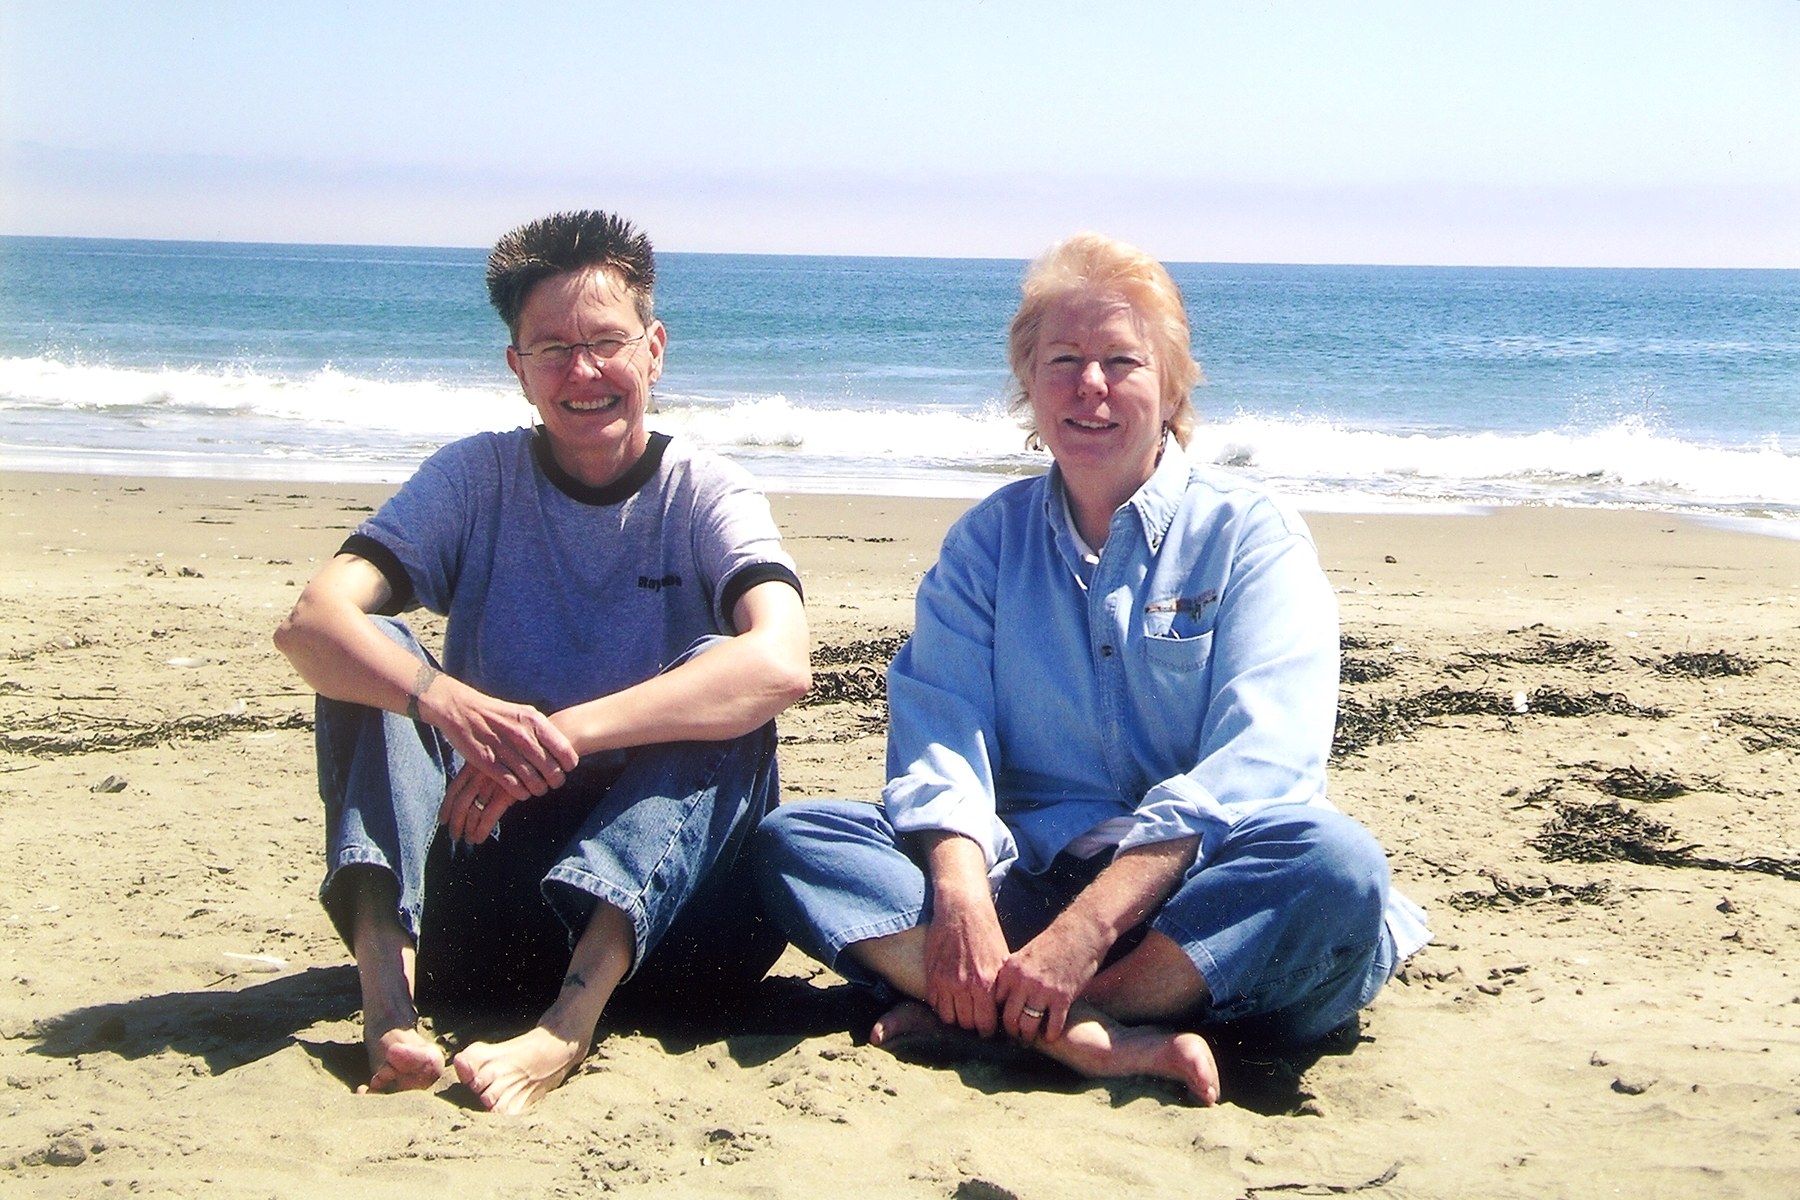 Vivienne Armstrong and Louise Young recreate an early photo of them together at Drakes Bay, Point Reyes National Seashore, August 2006, Marin County, CA. Photo Credit: Kate Trujillo Morello.